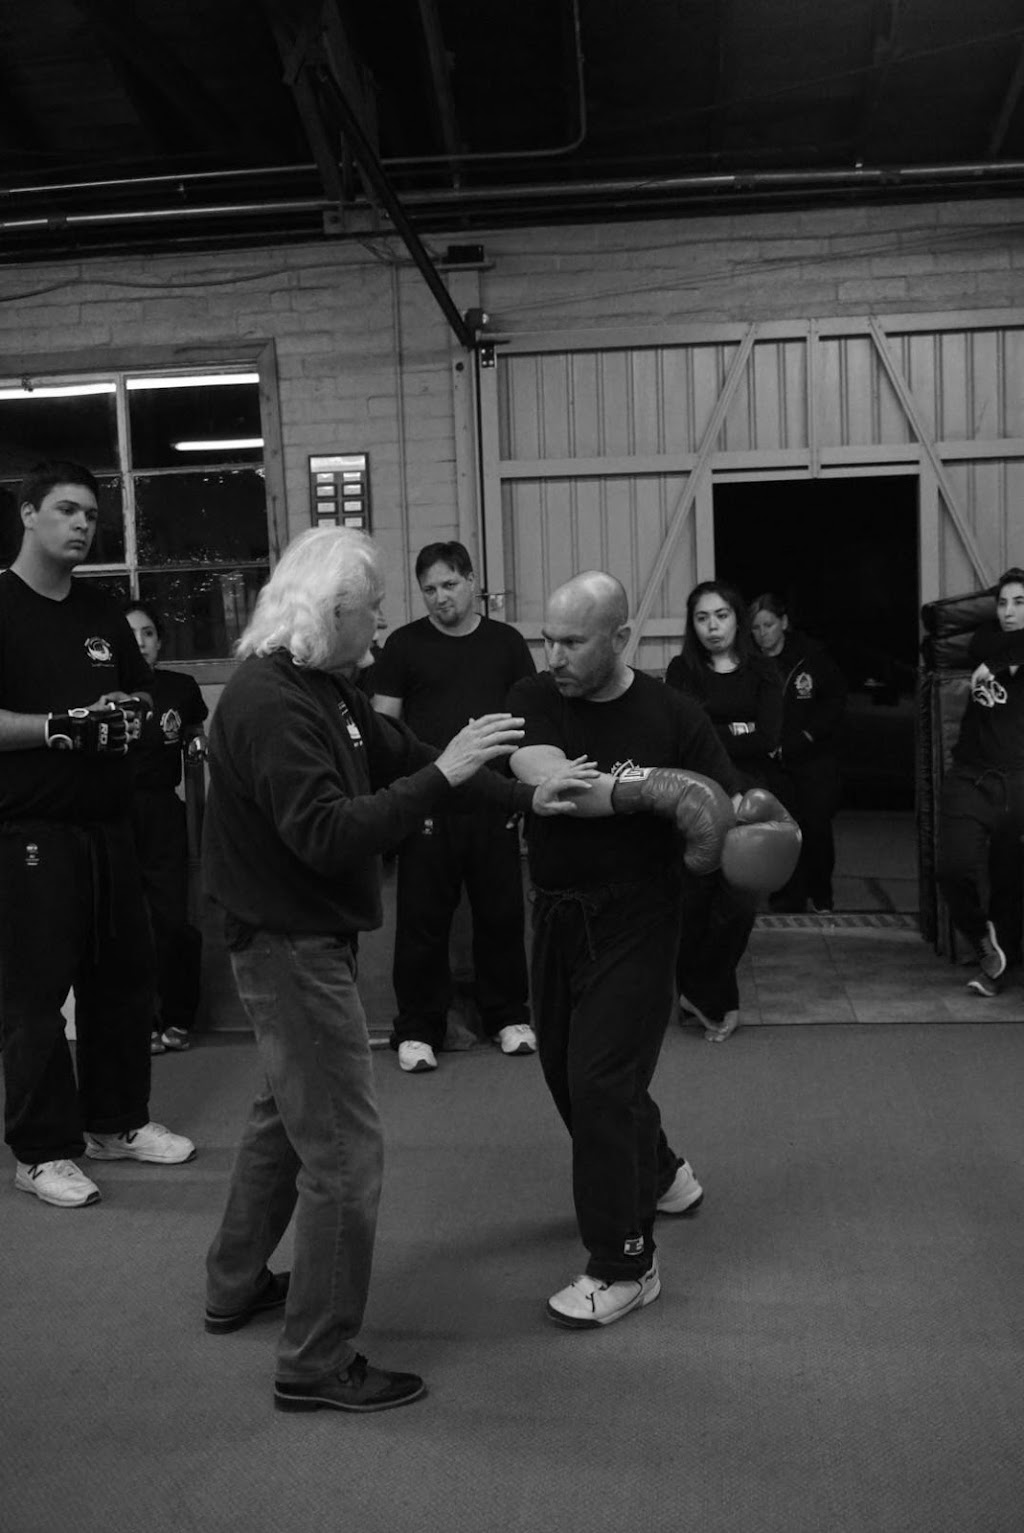 American School of Martial Arts - Wake Forest Kung Fu Inc | 710 N Main St, Wake Forest, NC 27587 | Phone: (984) 298-4147